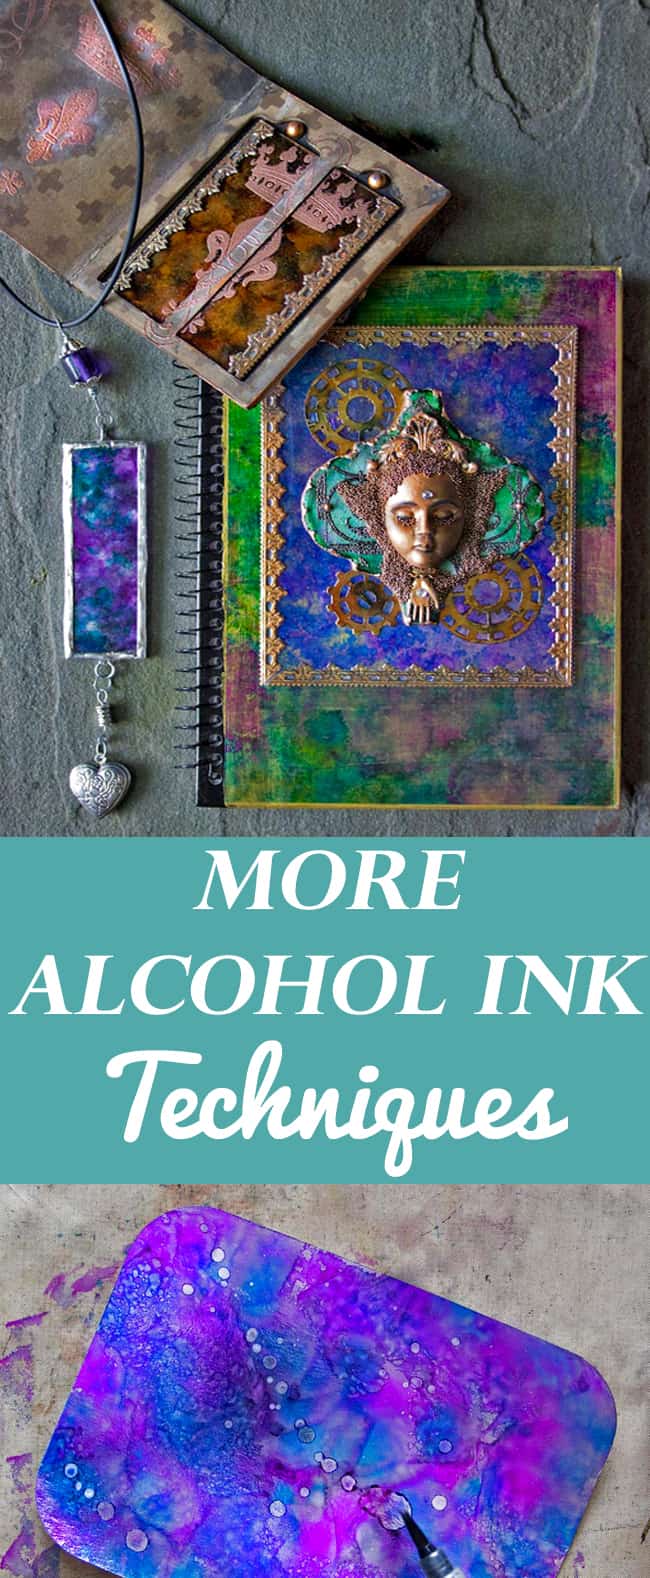 Basic alcohol ink techniques for beginnersza